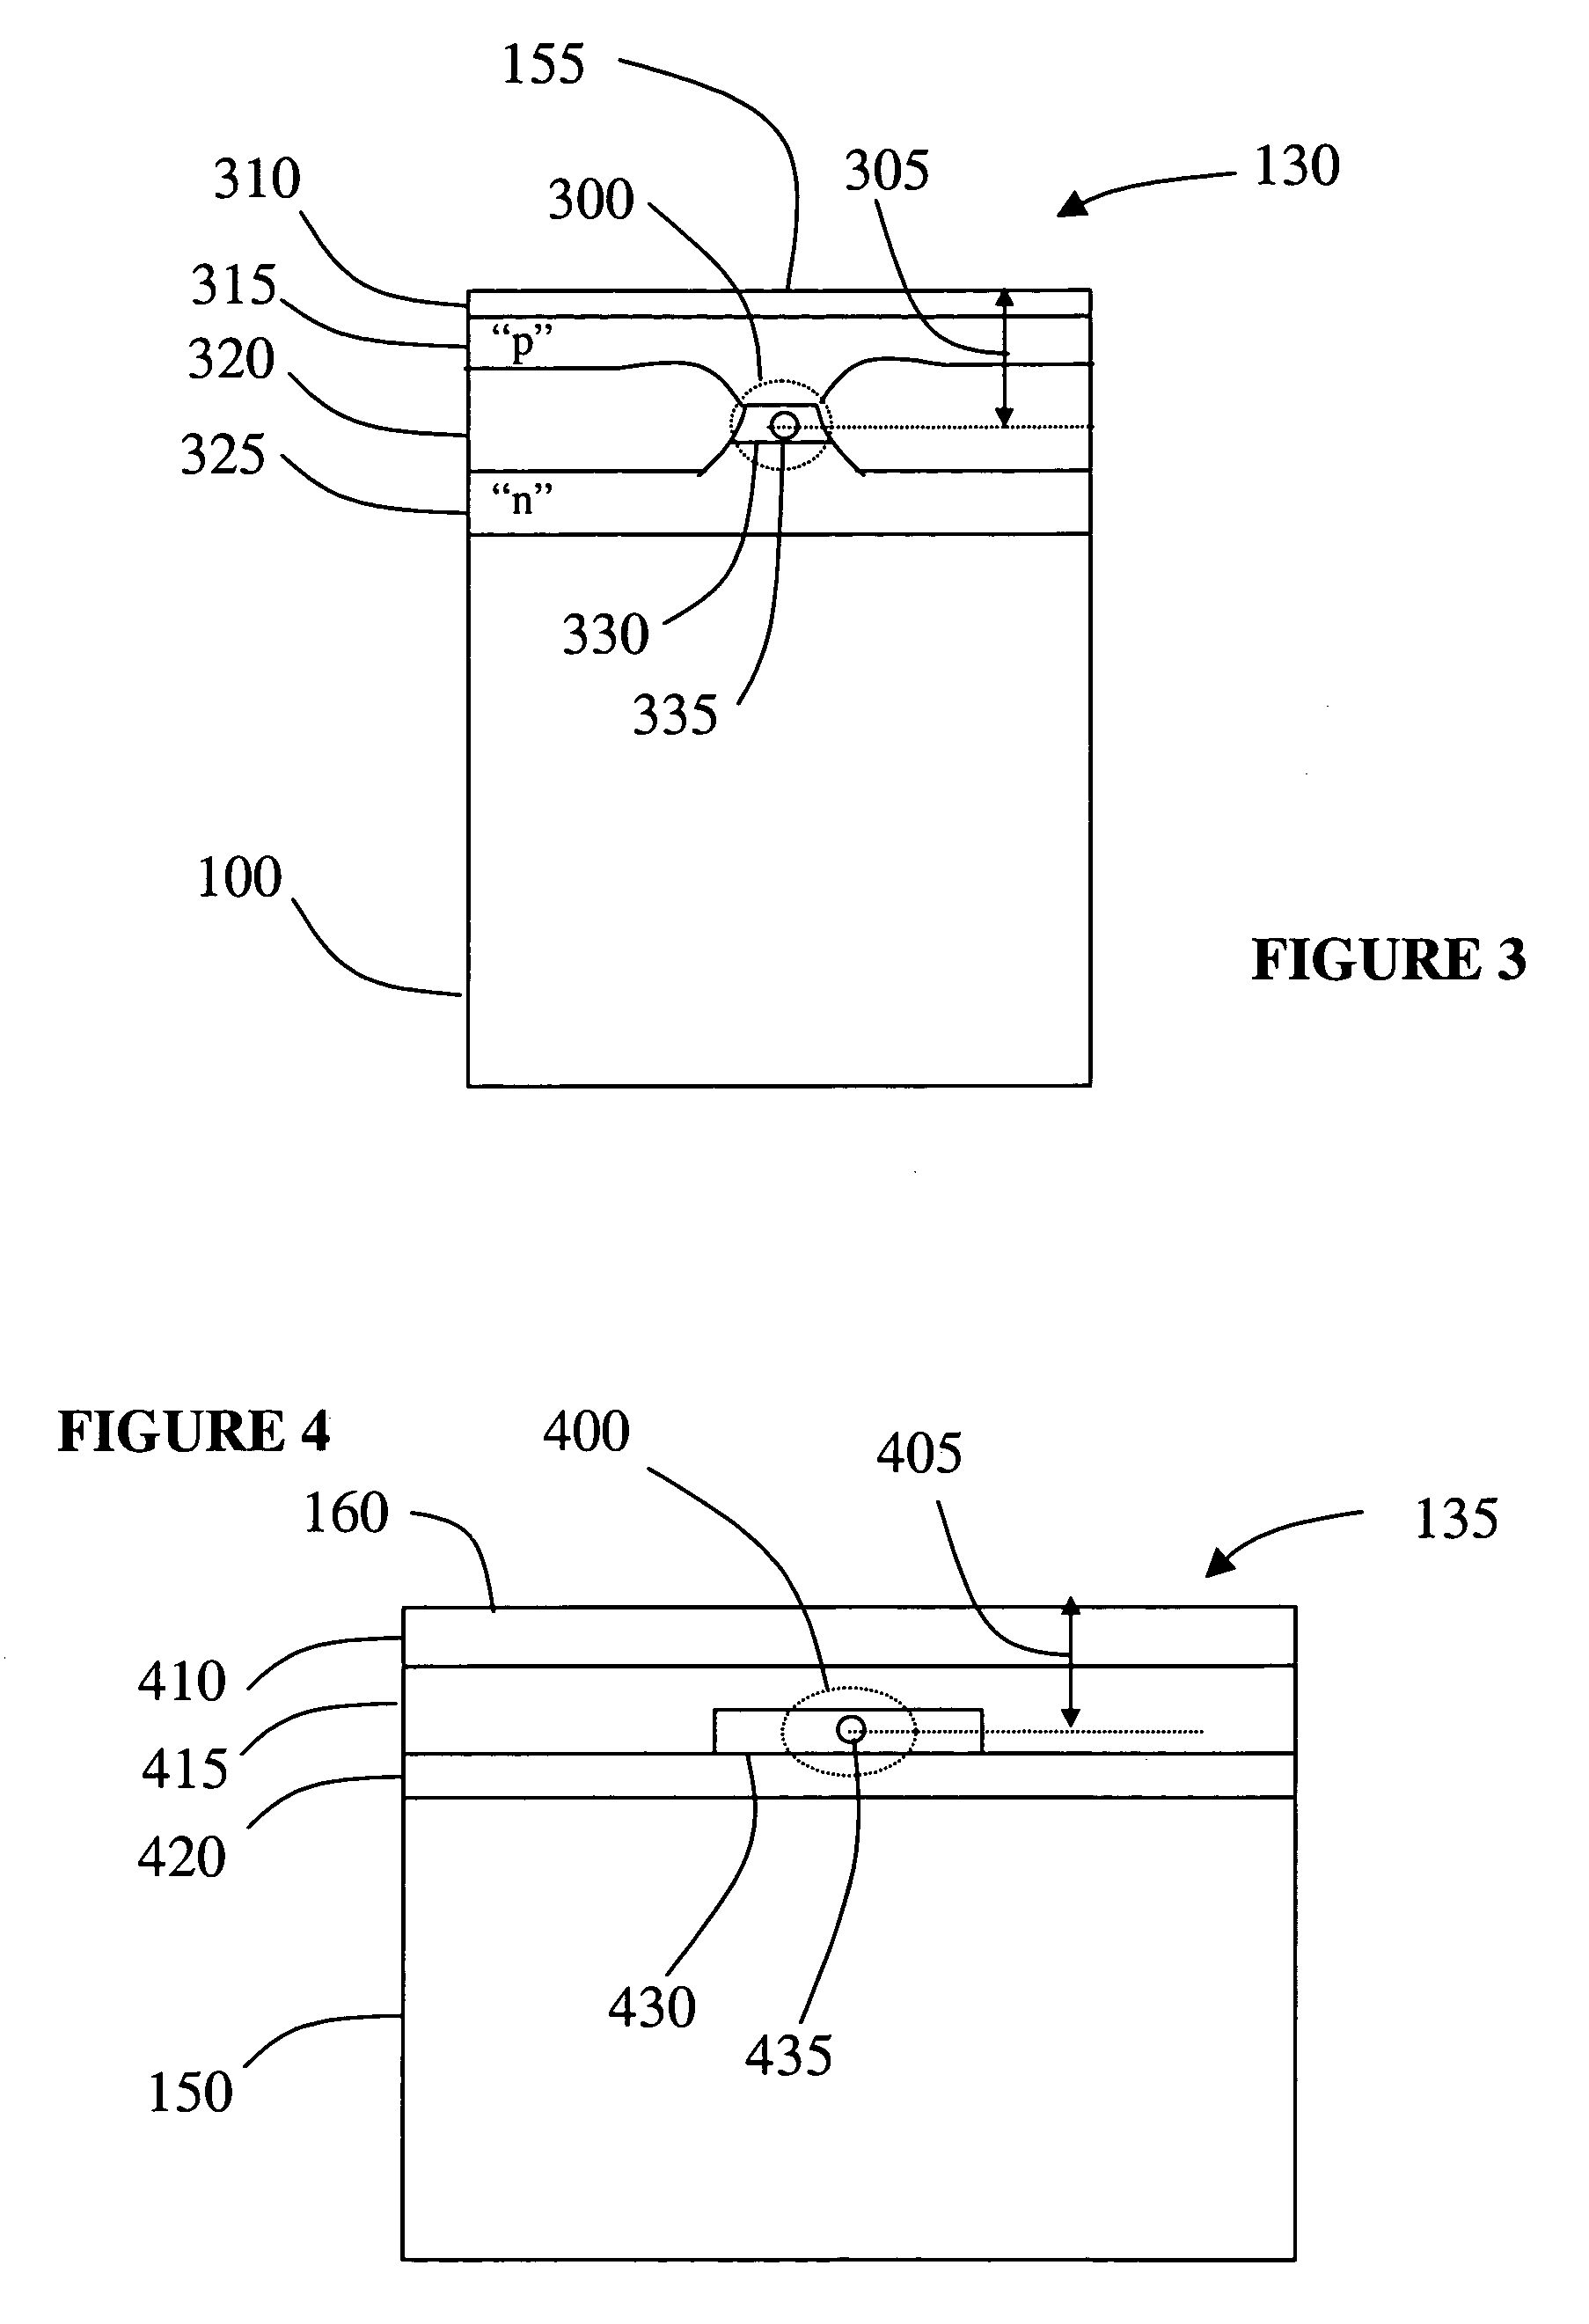 Optical component assembly